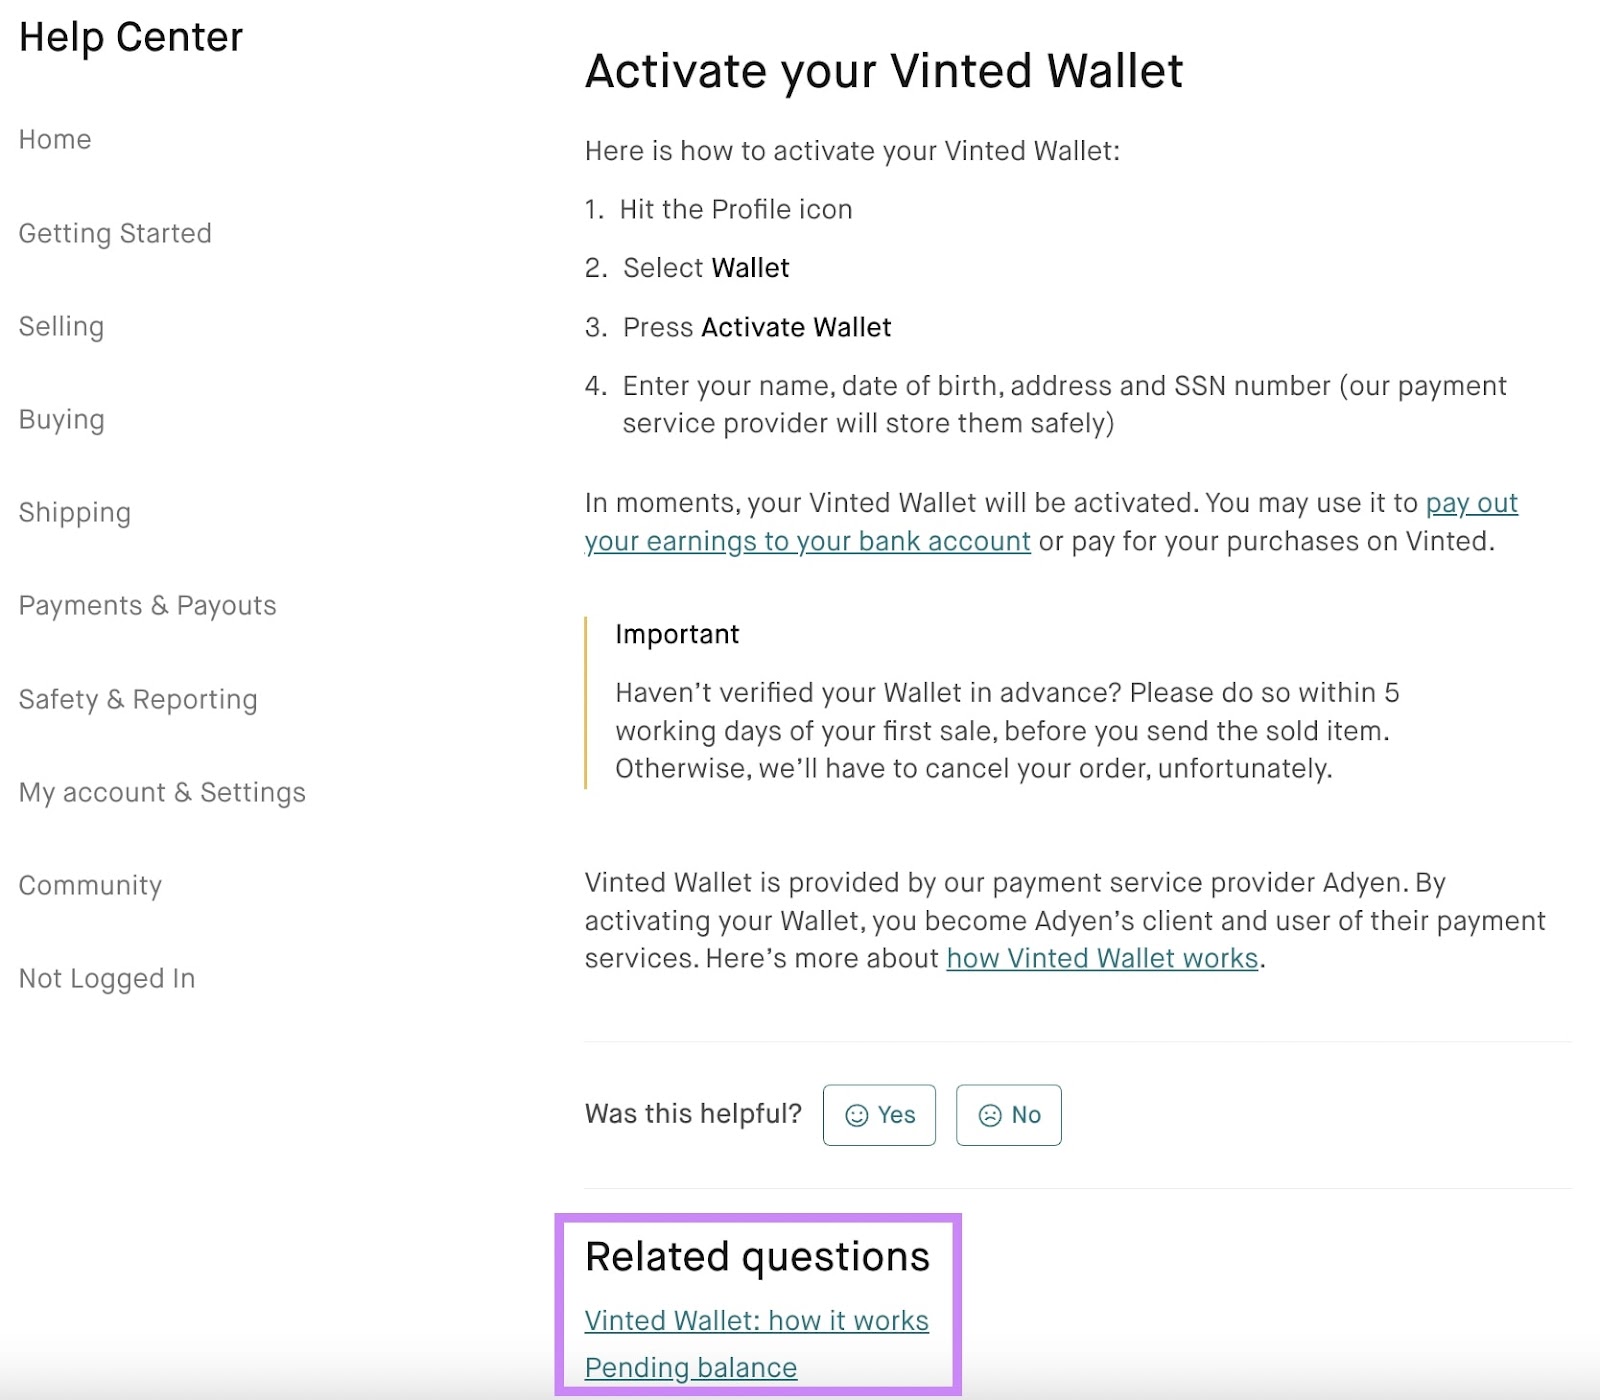 "Related questions" section highlighted at the bottom of "Activate your Vinted Wallet" page